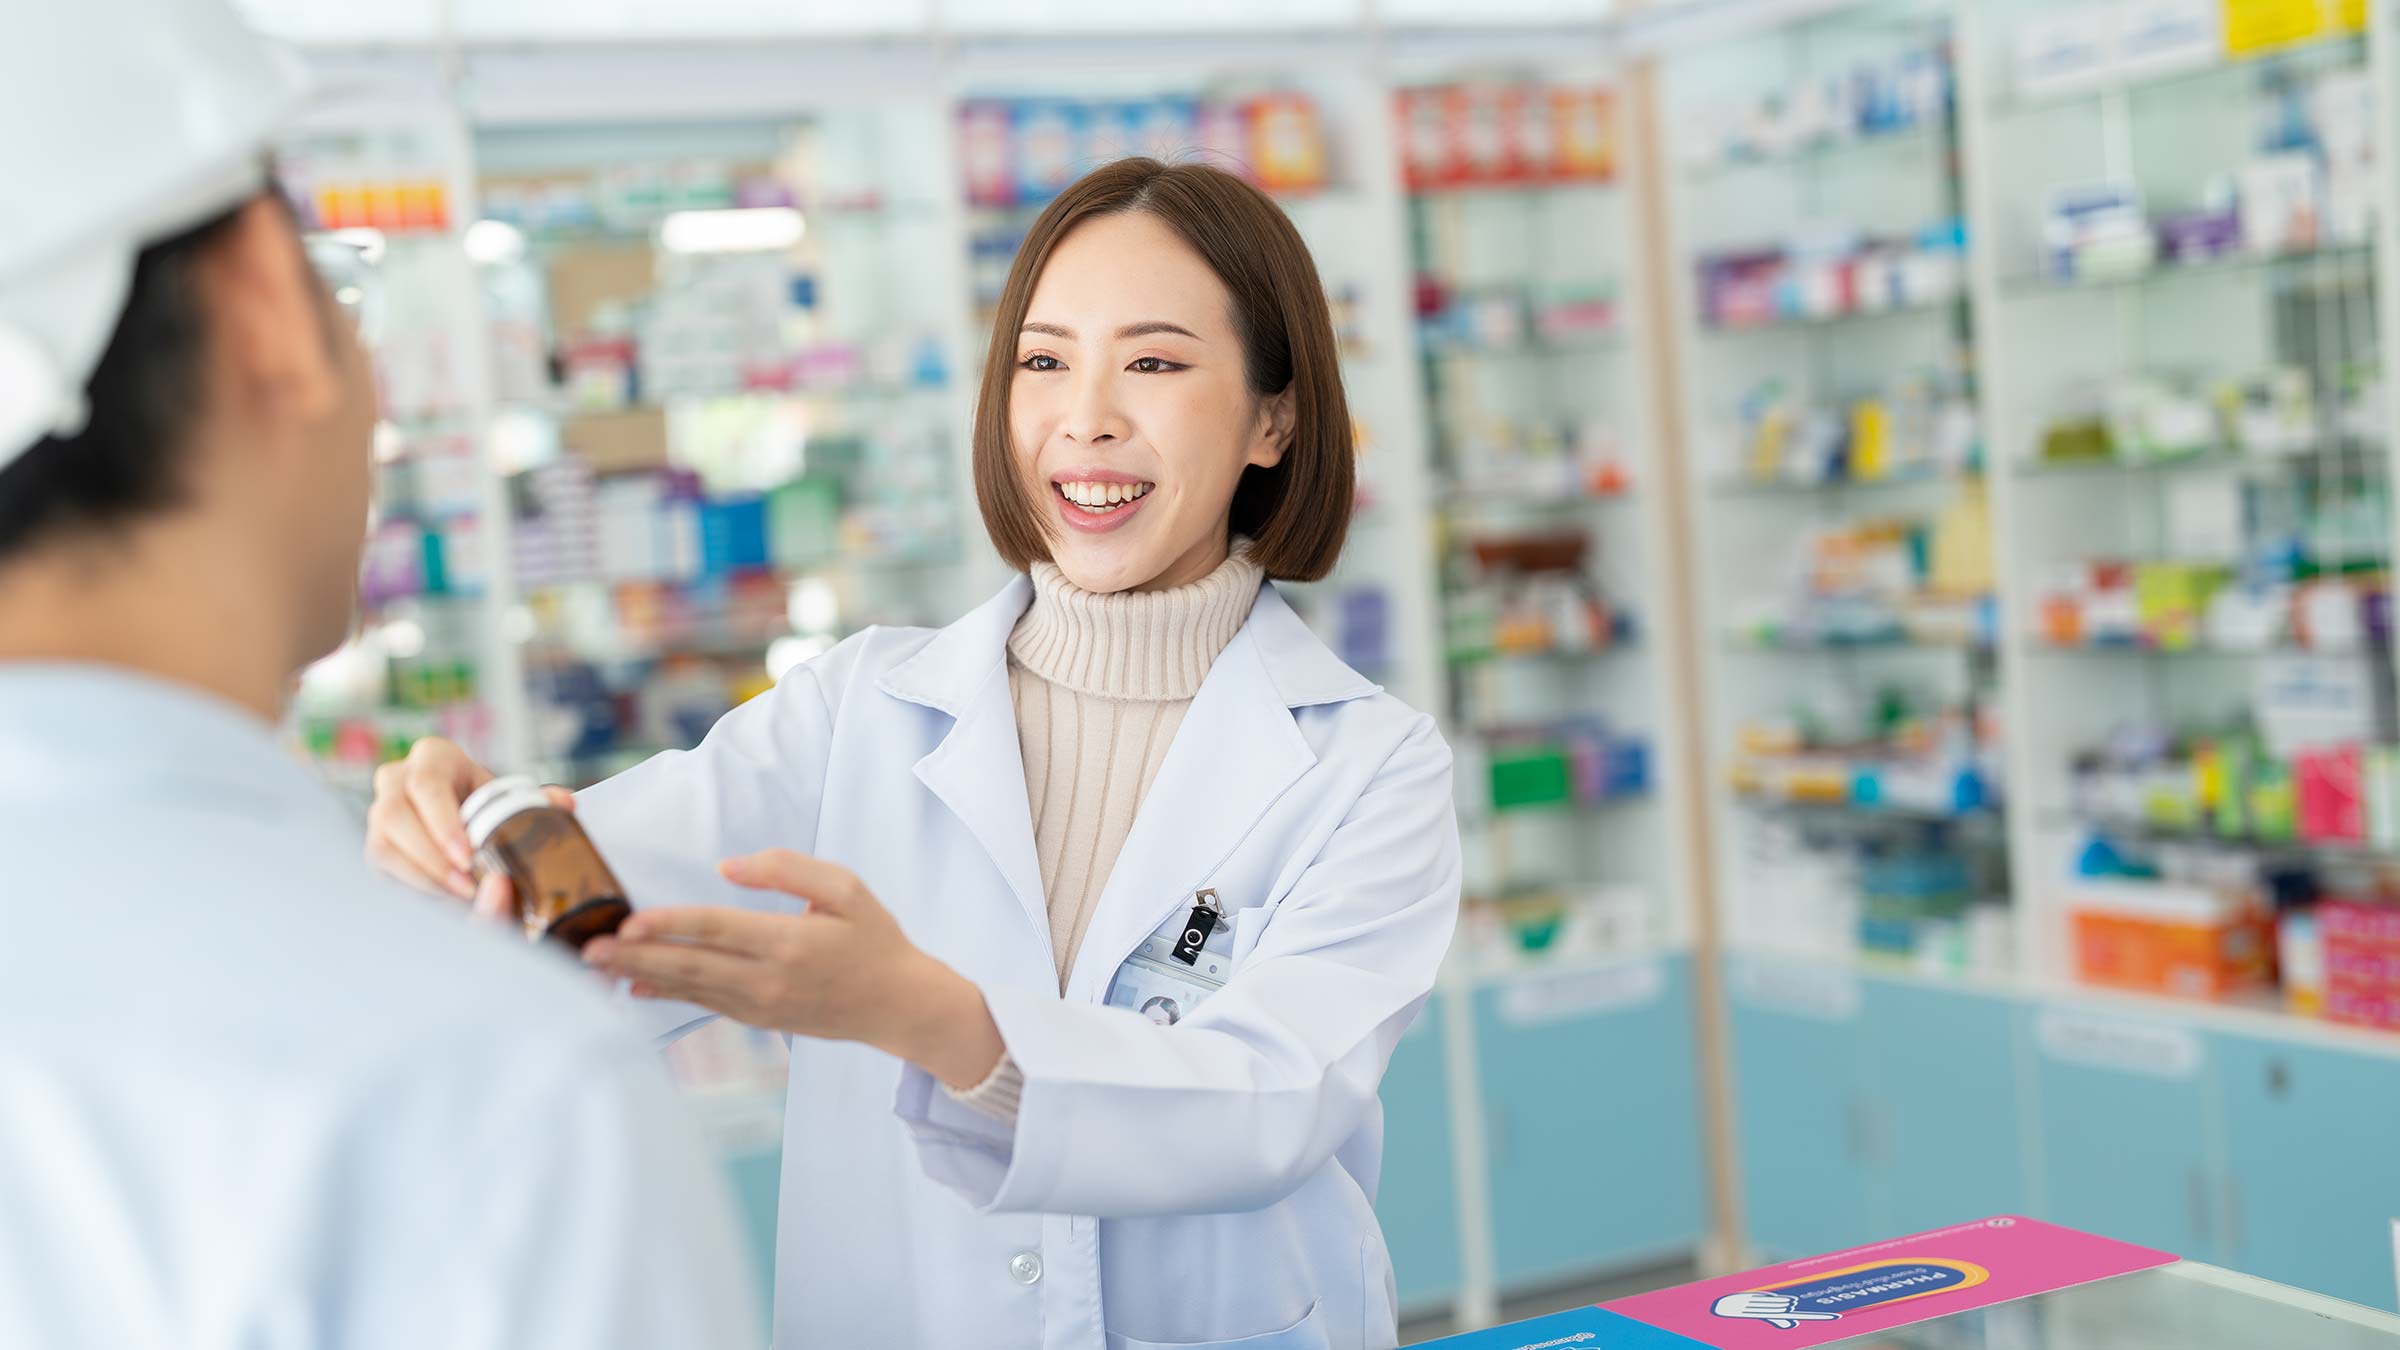 A pharmacist handing medication to a patient in the pharmacy